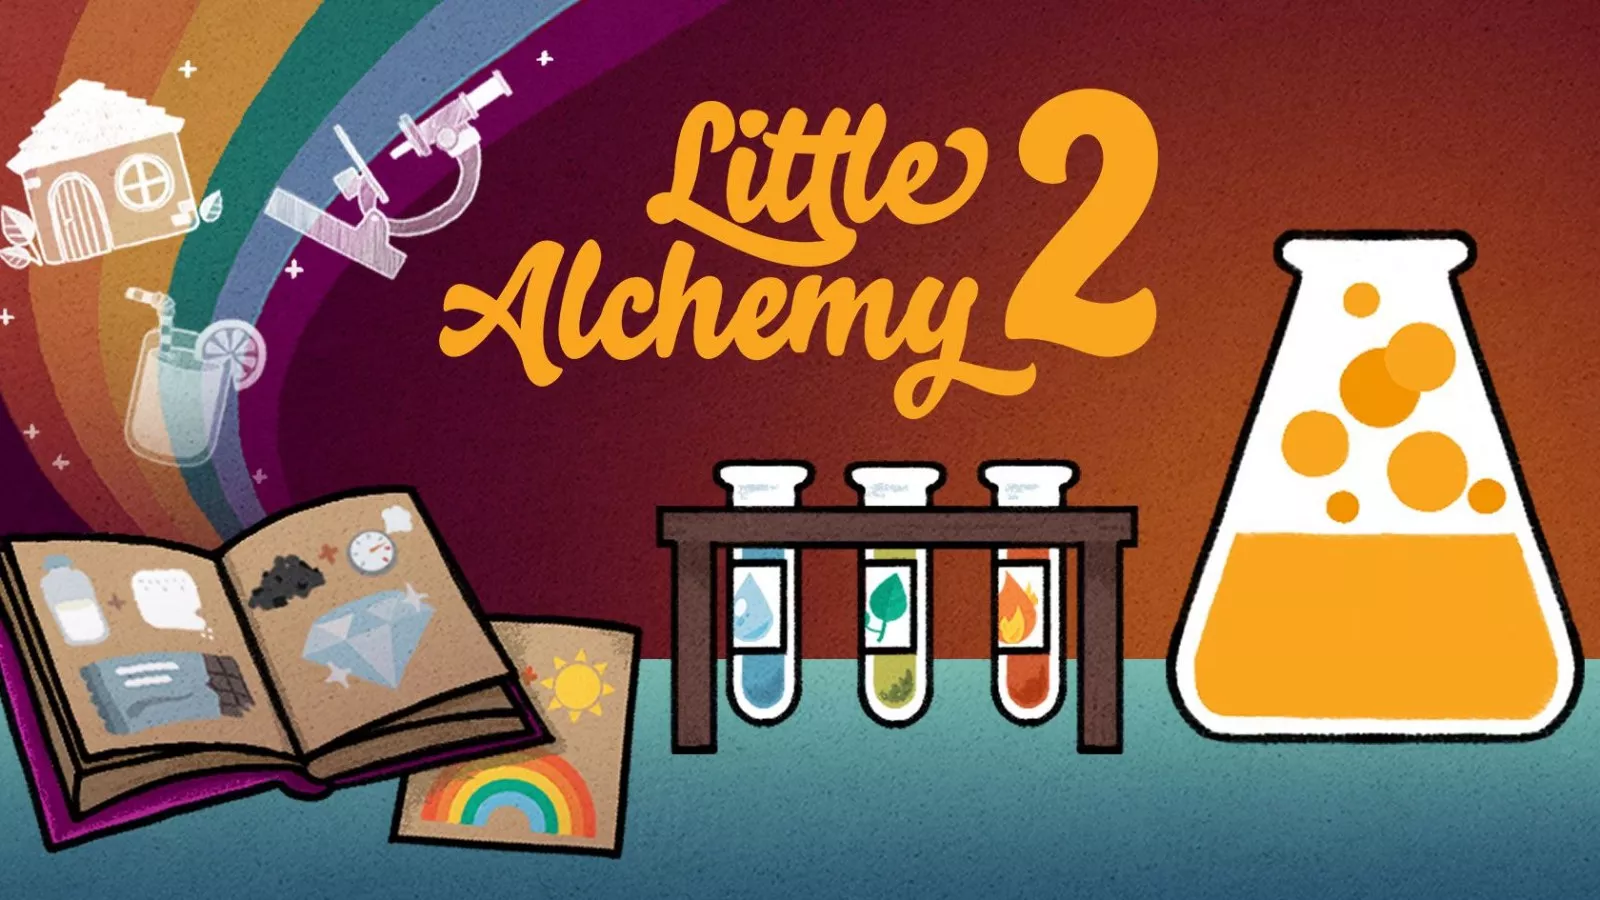 HEAVEN In Little Alchemy 2 Myths and Monsters 